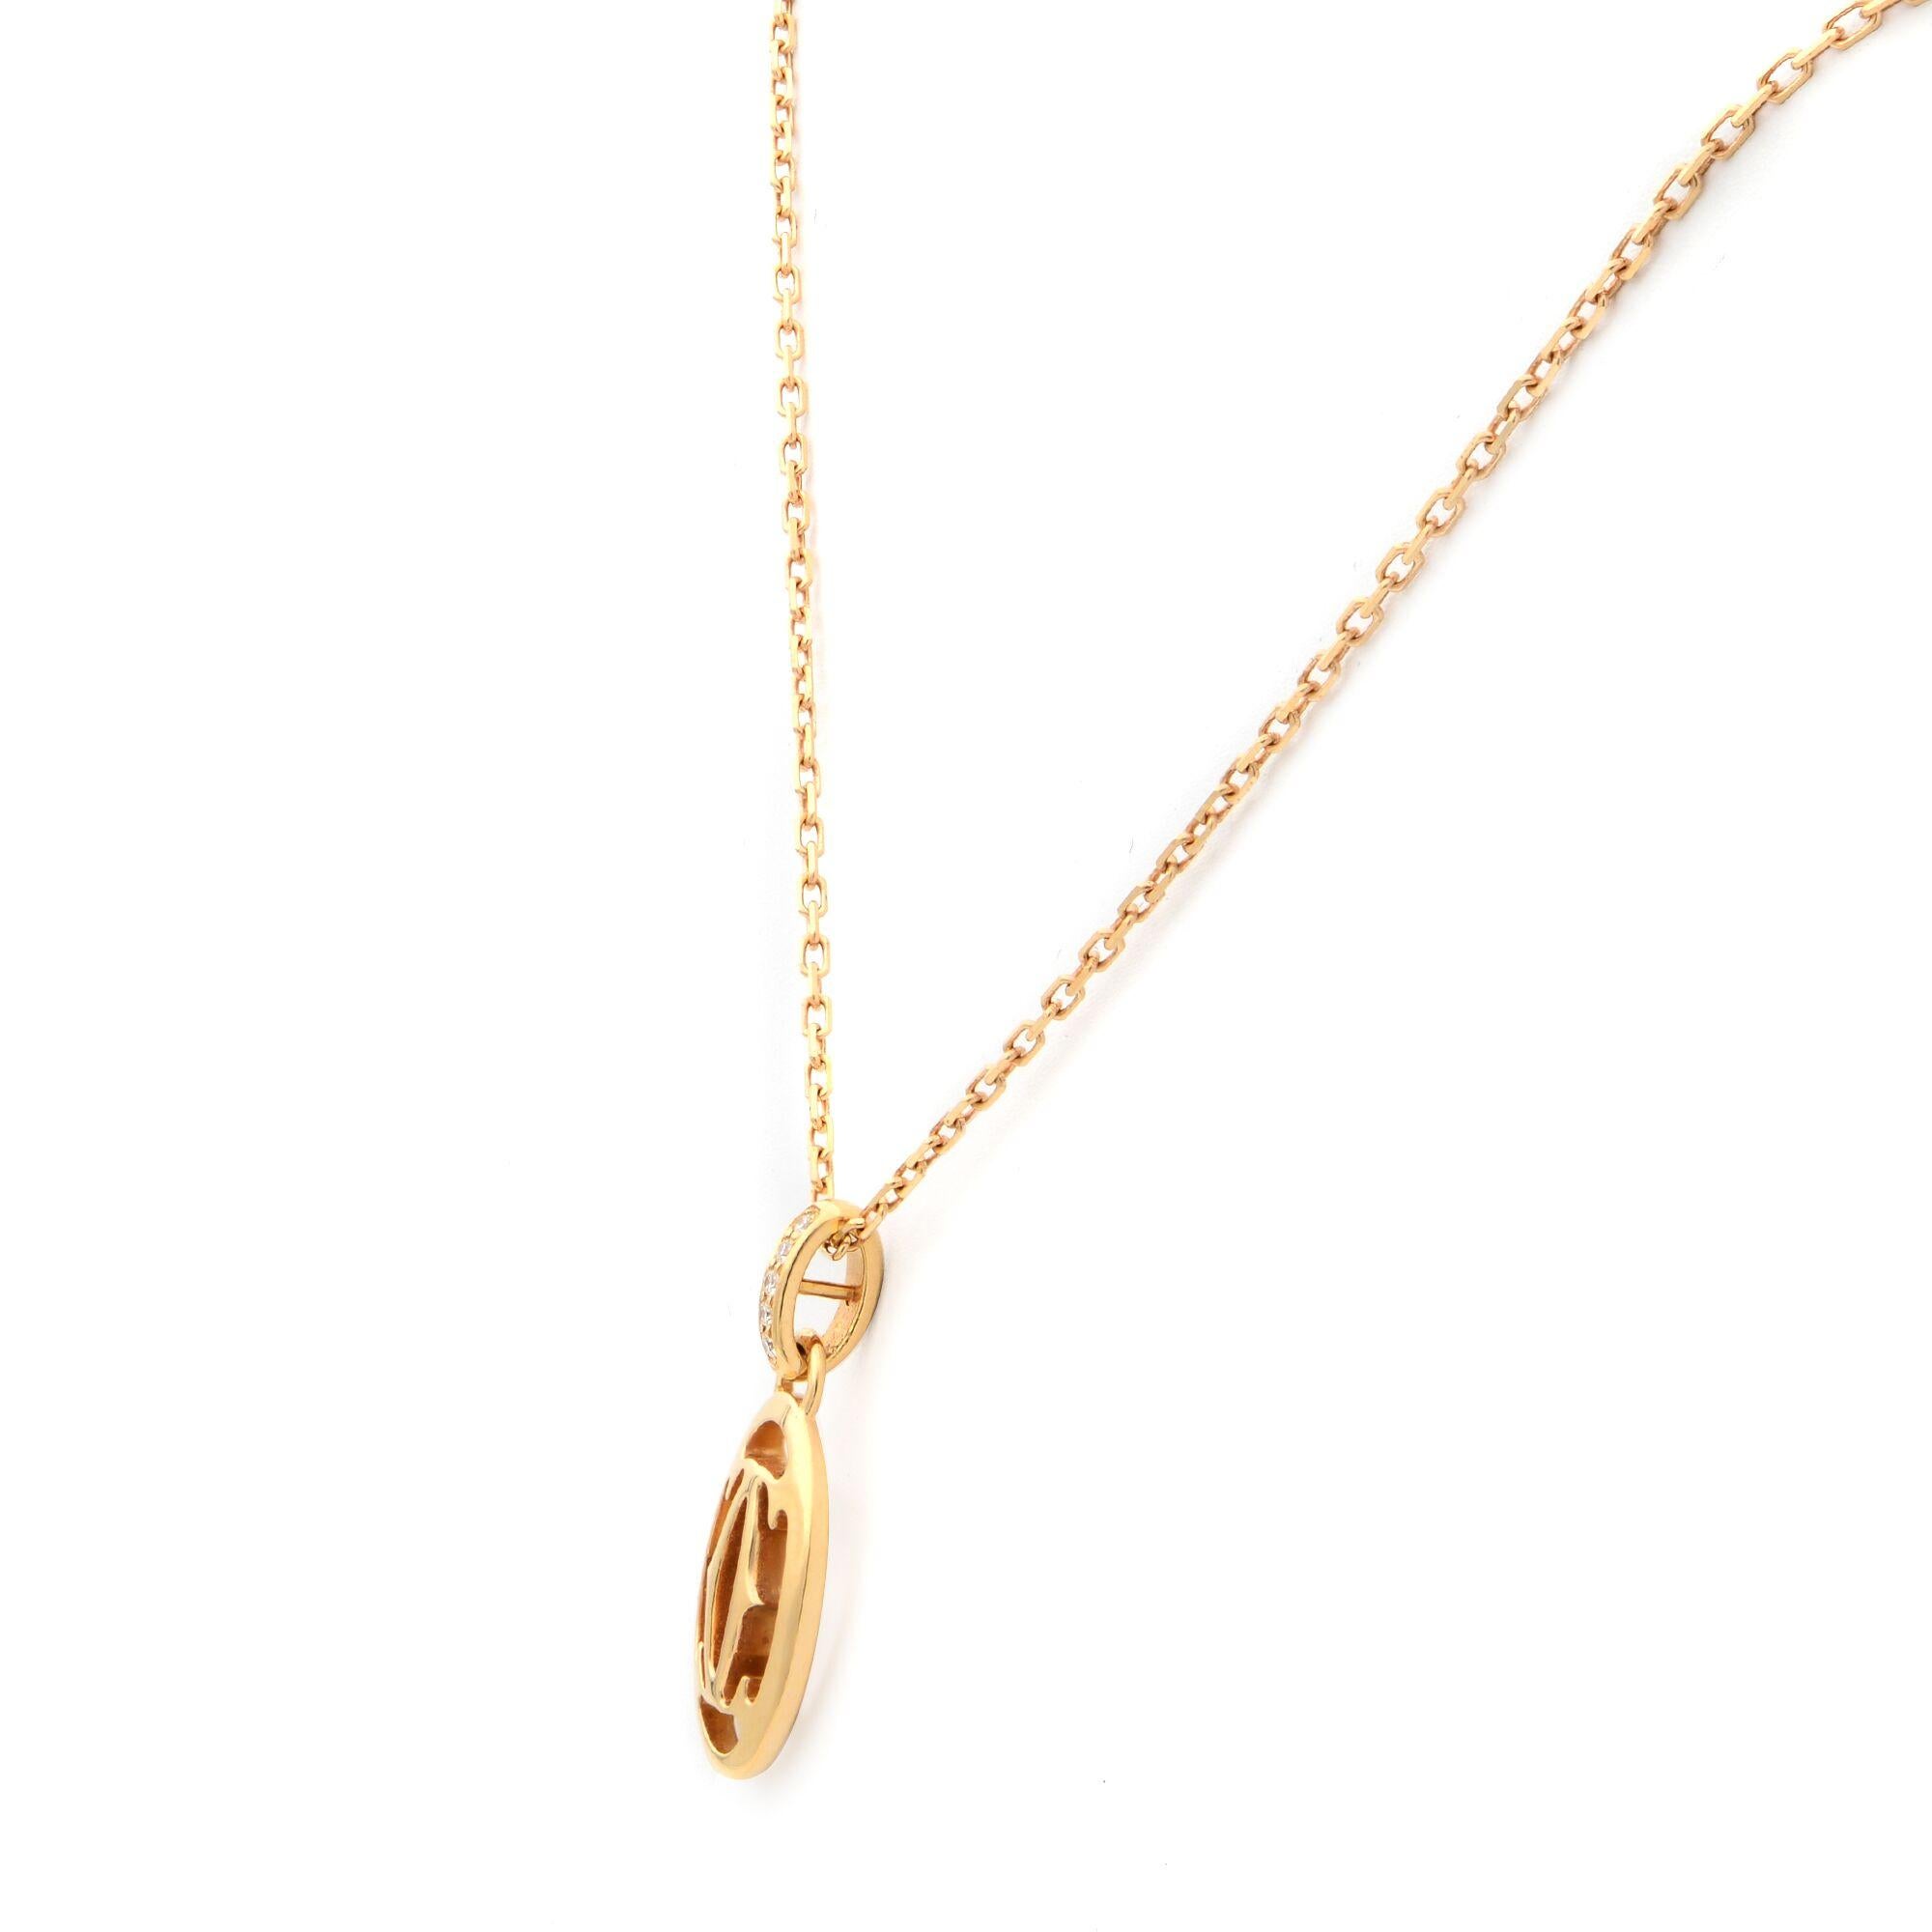 This stunning necklace from Cartier features a 18K rose gold chain with an oval pendant bordered with diamonds and a double C in the center. This elegant piece defines the timeless appeal of Cartier. Total carat weight: 0.02cts. Chain length: 16